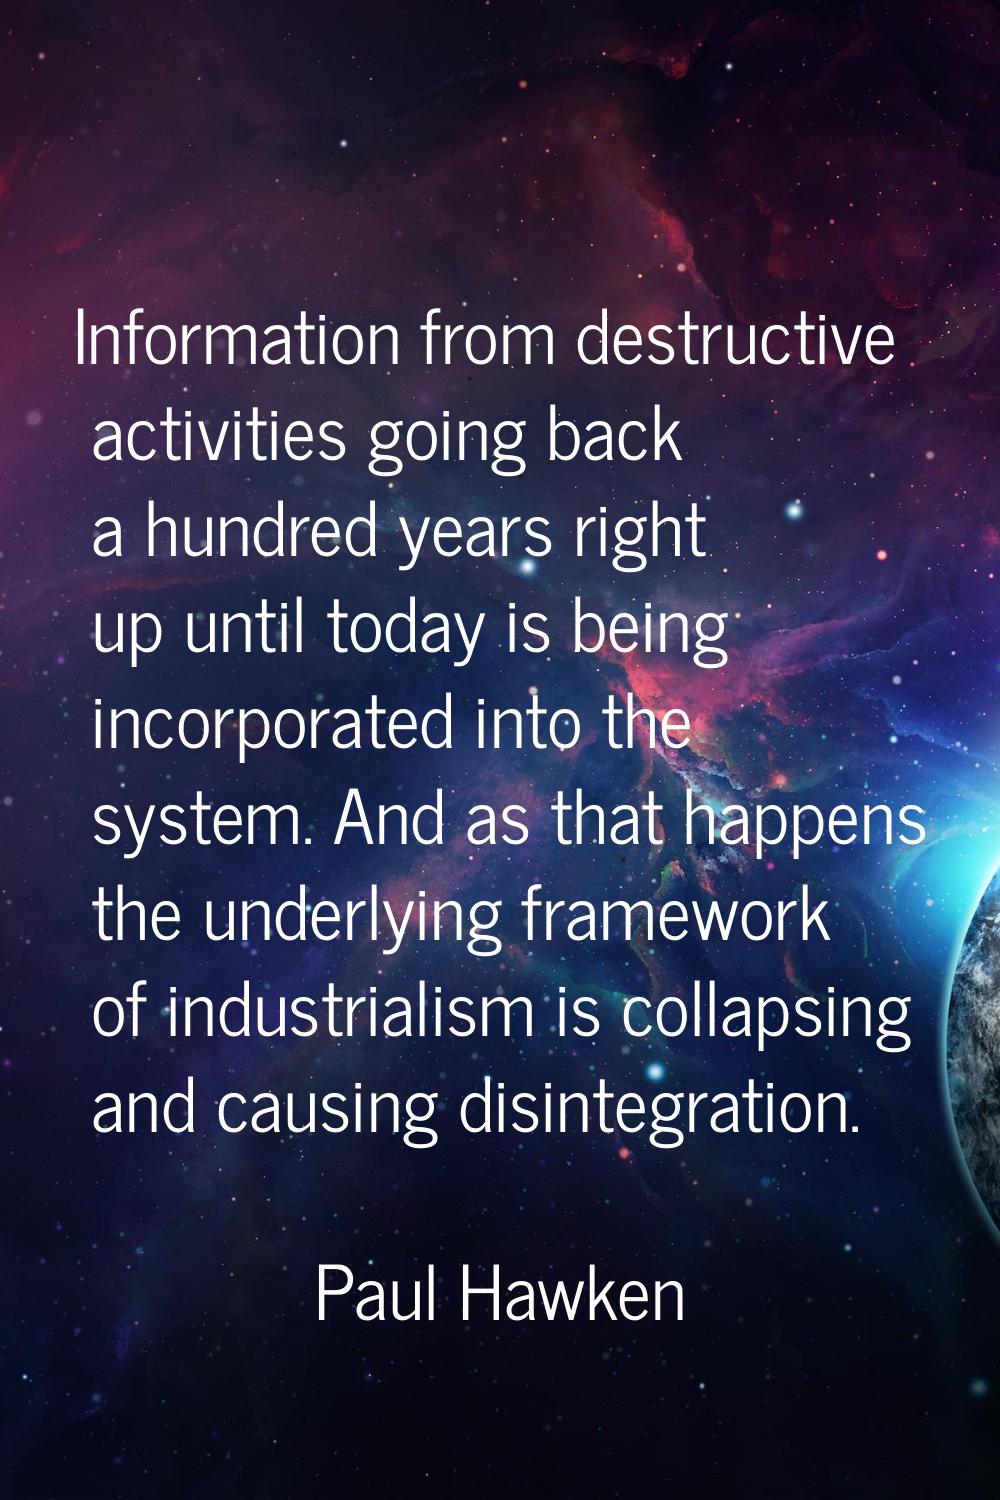 Information from destructive activities going back a hundred years right up until today is being in